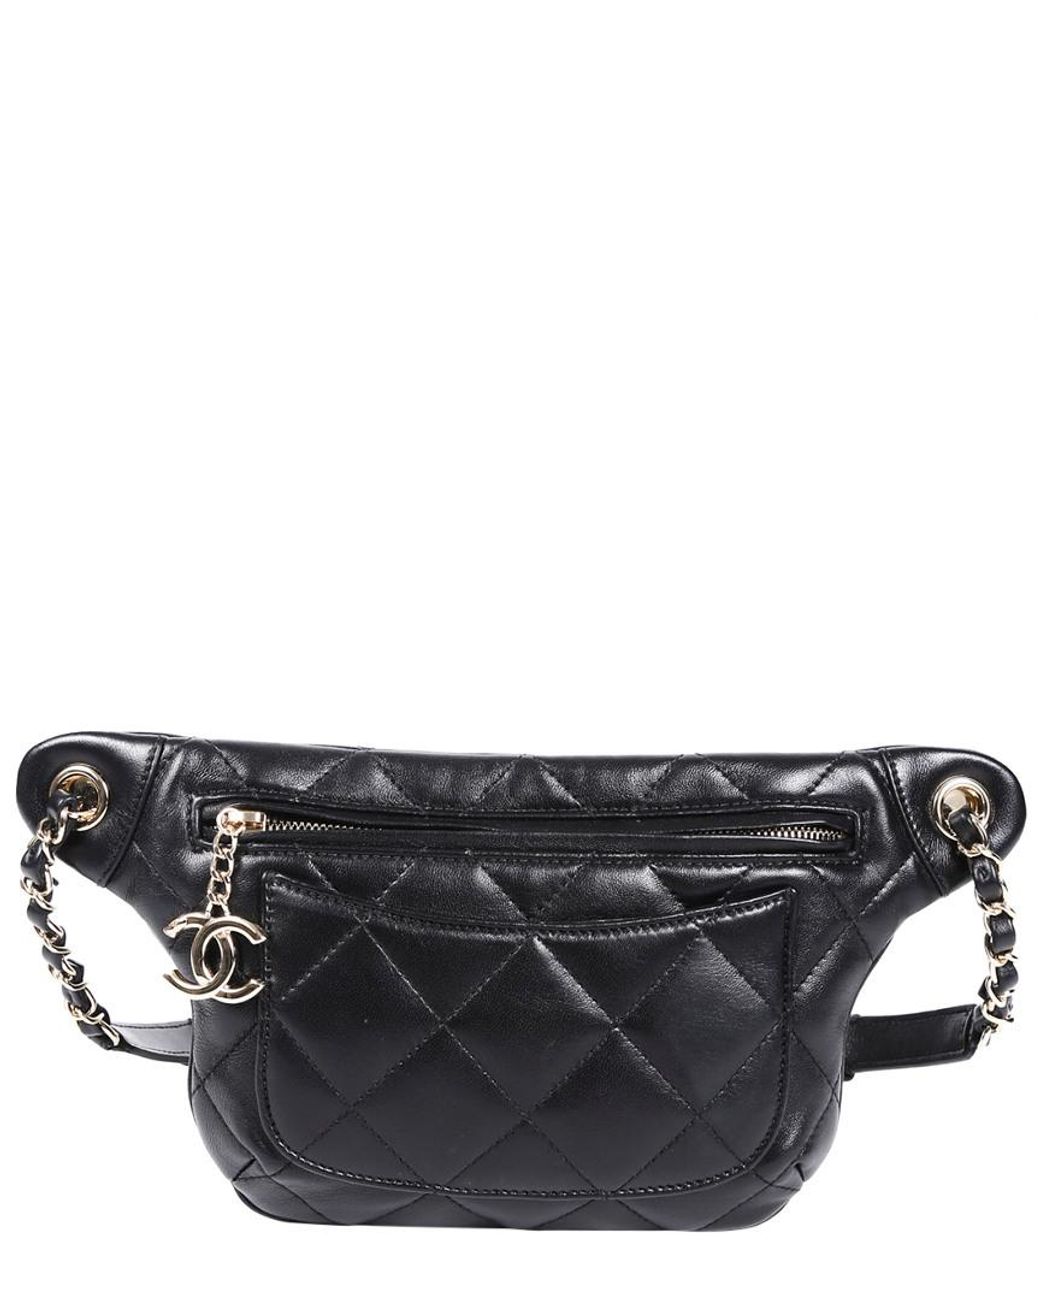 Chanel Black Quilted Leather Bi Classic Belt Bag Nm | Lyst UK